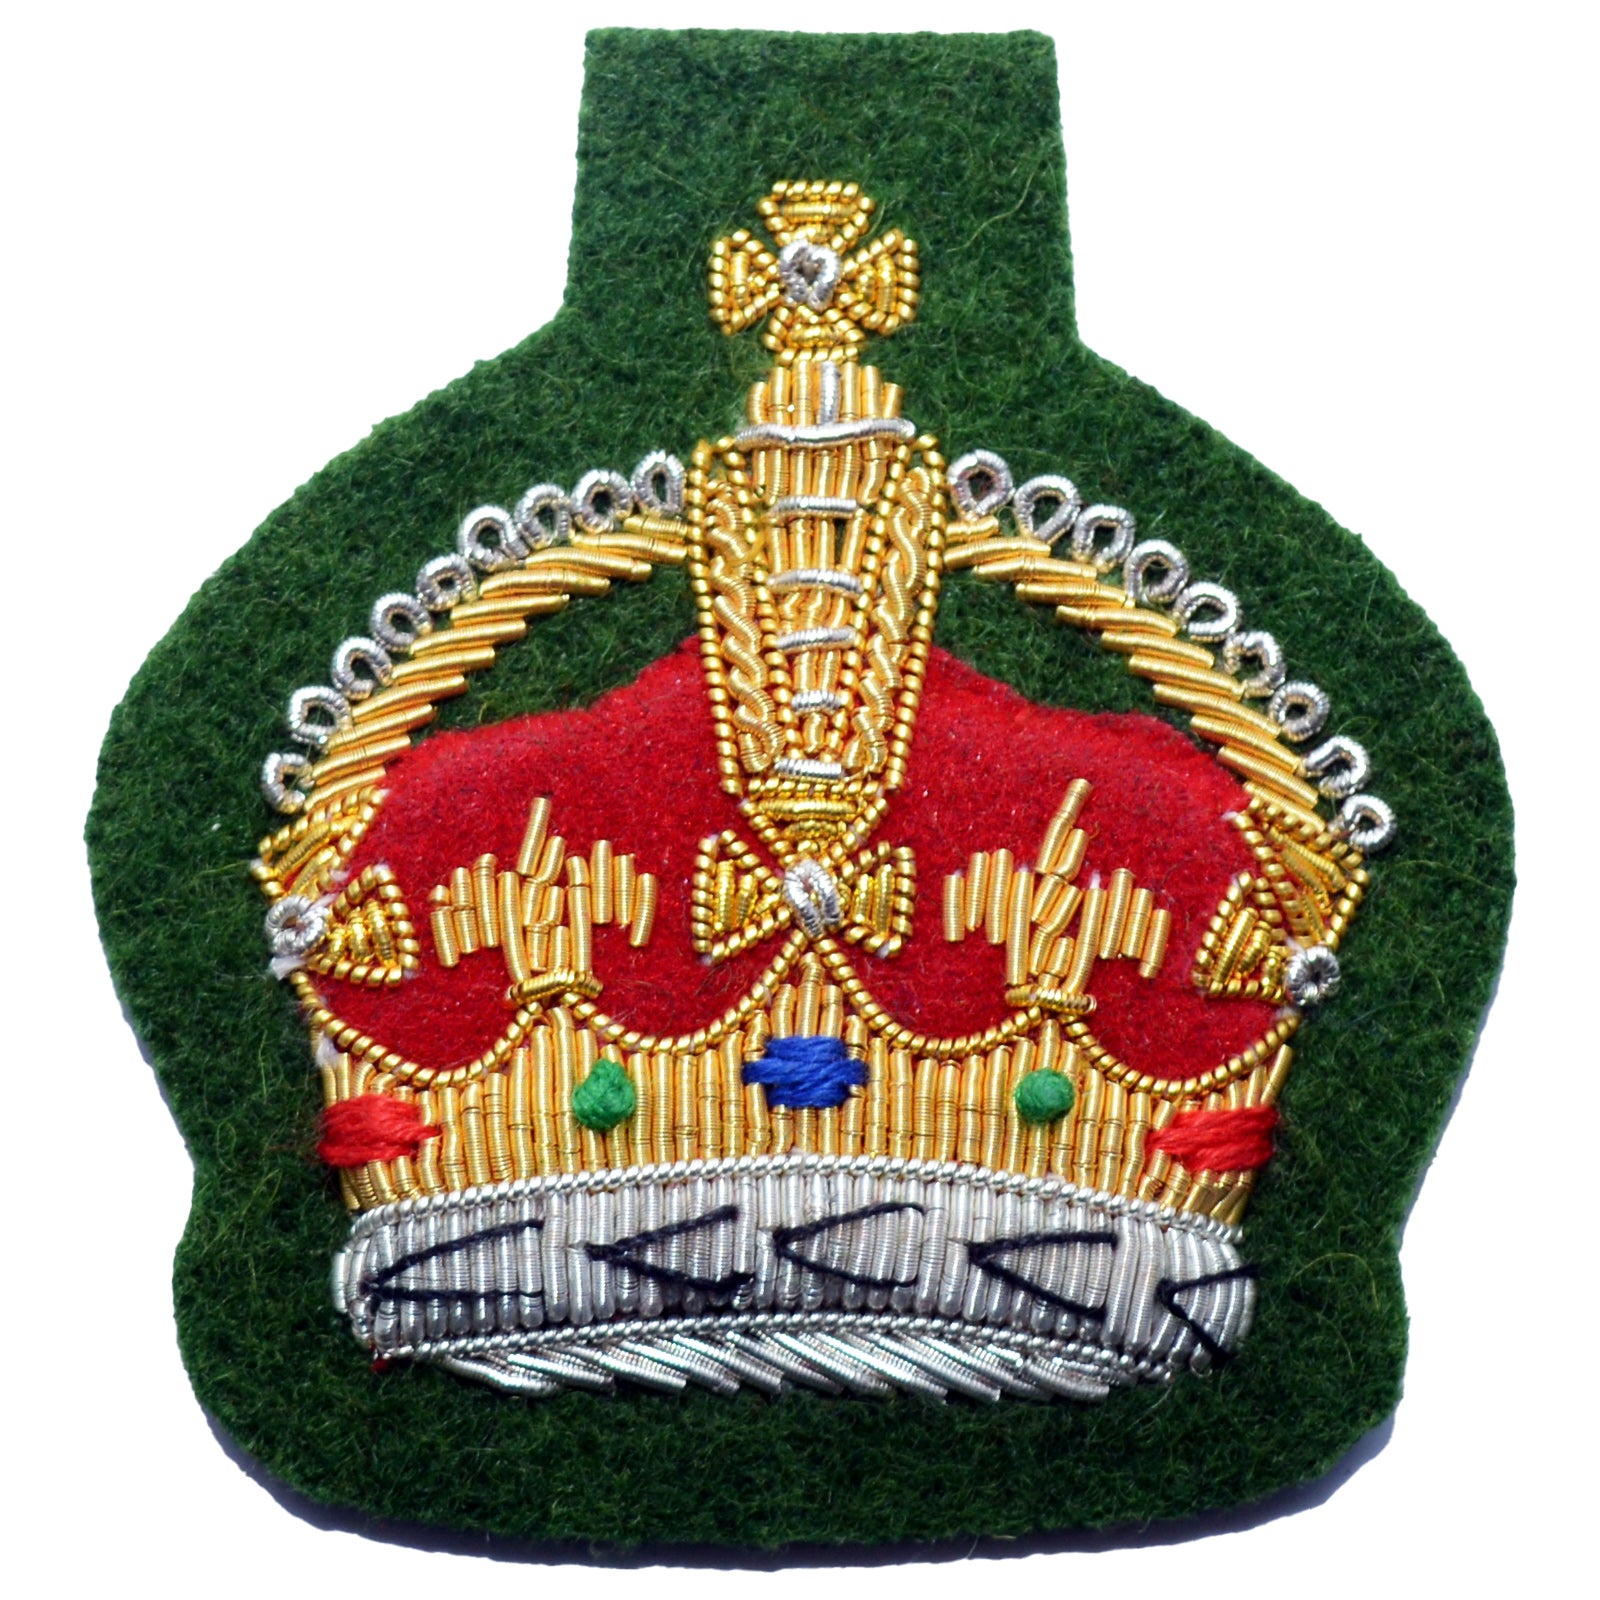 (King's Crown) QMS, CSgt and SSgt NCO's Small Crown Rank Badge Intelligence Corps British Army